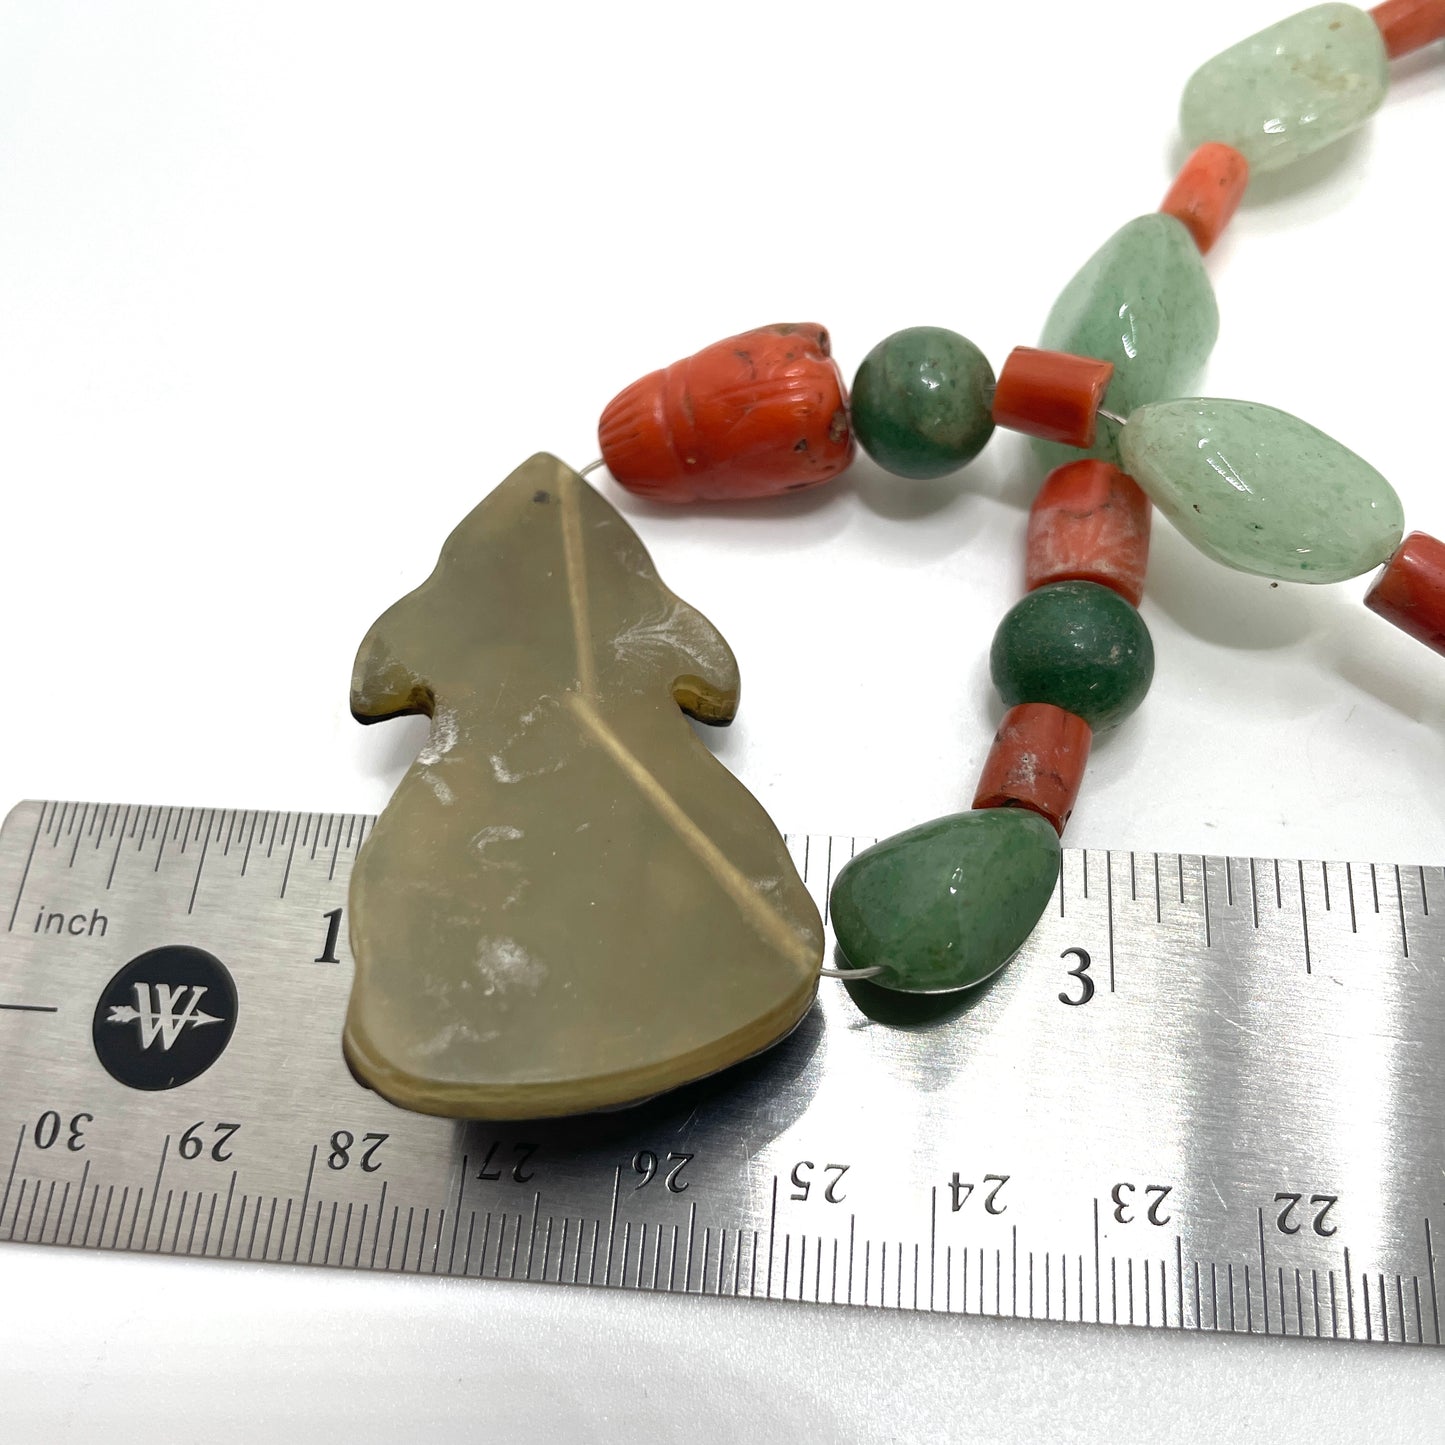 Natural Stone Green & Orange Necklace with Pendant